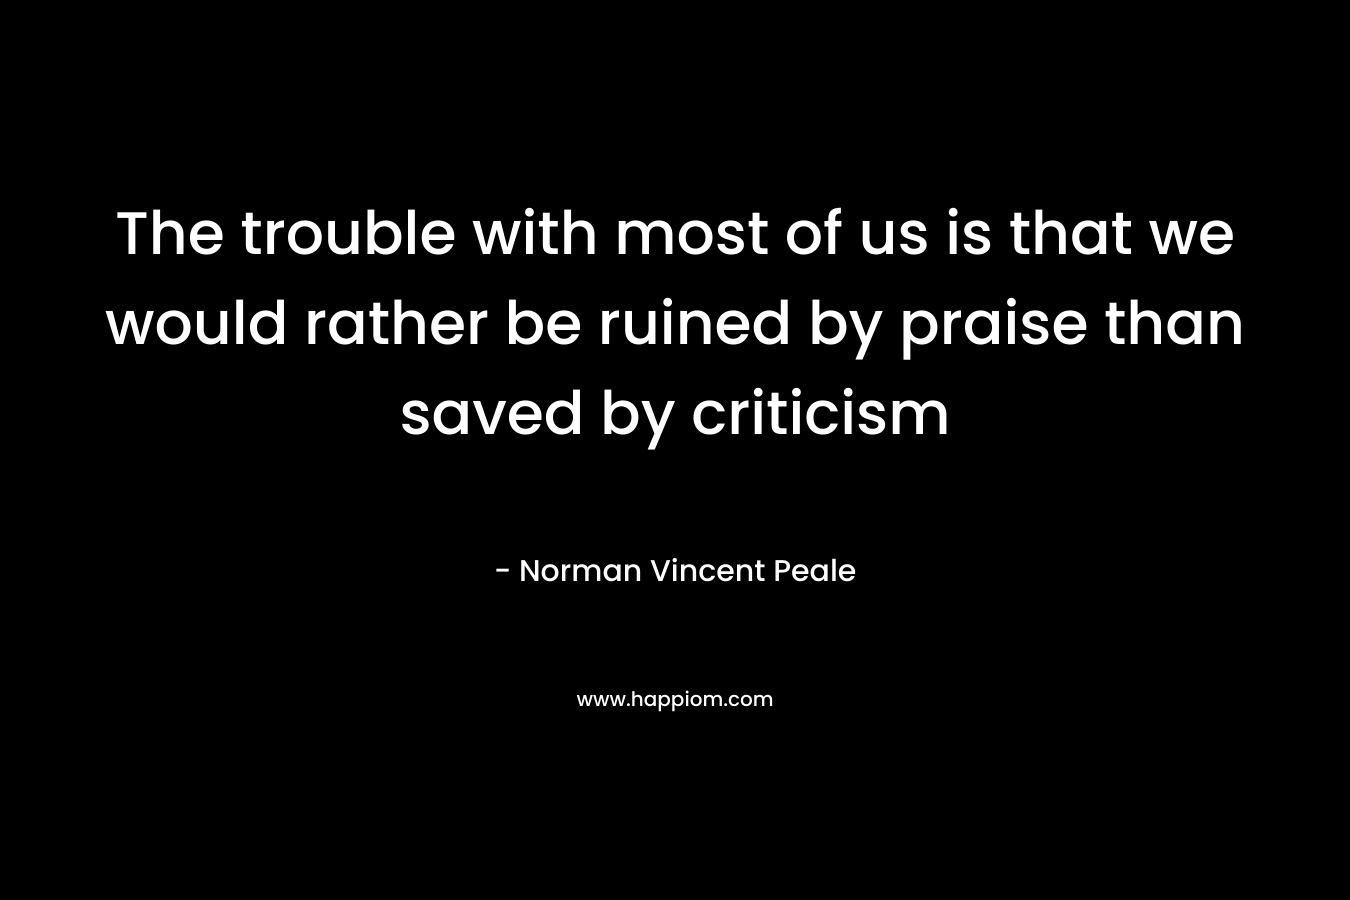 The trouble with most of us is that we would rather be ruined by praise than saved by criticism – Norman Vincent Peale